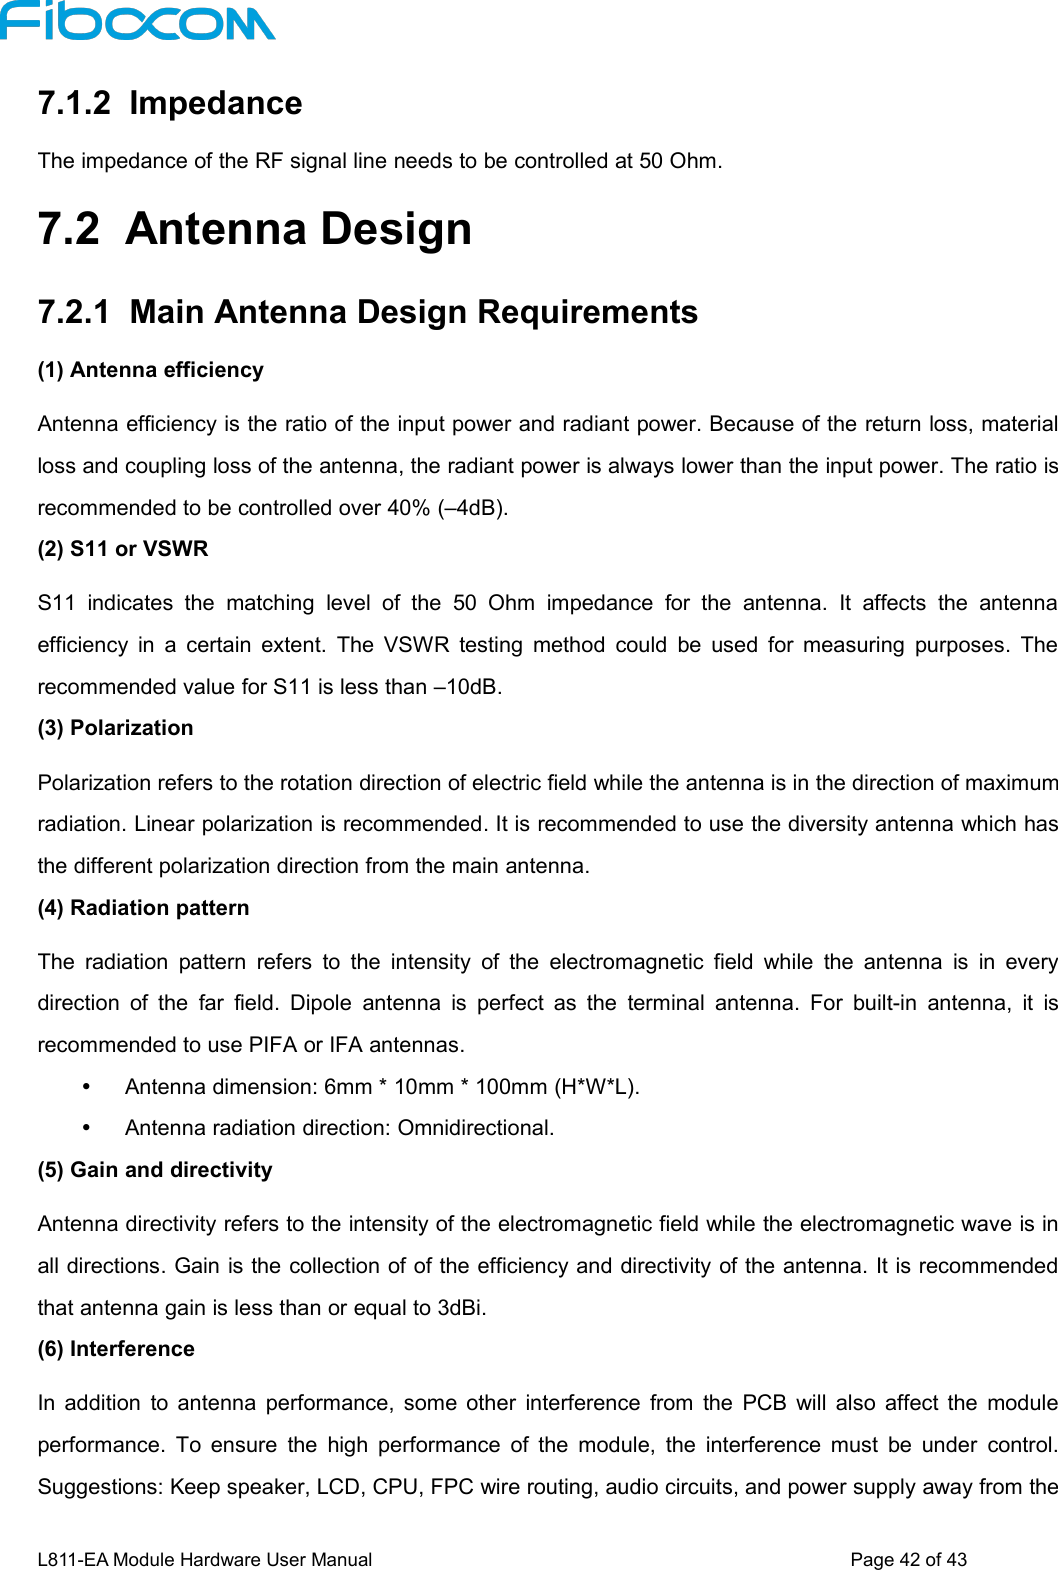 L811-EA Module Hardware User Manual Page42of437.1.2 ImpedanceThe impedance of the RF signal line needs to be controlled at 50 Ohm.7.2 Antenna Design7.2.1 Main Antenna Design Requirements(1) Antenna efficiencyAntenna efficiency is the ratio of the input power and radiant power. Because of the return loss, materialloss and coupling loss of the antenna, the radiant power is always lower than the input power. The ratio isrecommended to be controlled over 40% (–4dB).(2) S11 or VSWRS11 indicates the matching level of the 50 Ohm impedance for the antenna. It affects the antennaefficiency in a certain extent. The VSWR testing method could be used for measuring purposes. Therecommended value for S11 is less than –10dB.(3) PolarizationPolarization refers to the rotation direction of electric field while the antenna is in the direction of maximumradiation. Linear polarization is recommended. It is recommended to use the diversity antenna which hasthe different polarization direction from the main antenna.(4) Radiation patternThe radiation pattern refers to the intensity of the electromagnetic field while the antenna is in everydirection of the far field. Dipole antenna is perfect as the terminal antenna. For built-in antenna, it isrecommended to use PIFA or IFA antennas.Antenna dimension: 6mm * 10mm * 100mm (H*W*L).Antenna radiation direction: Omnidirectional.(5) Gain and directivityAntenna directivity refers to the intensity of the electromagnetic field while the electromagnetic wave is inall directions. Gain is the collection of of the efficiency and directivity of the antenna. It is recommendedthat antenna gain is less than or equal to 3dBi.(6) InterferenceIn addition to antenna performance, some other interference from the PCB will also affect the moduleperformance. To ensure the high performance of the module, the interference must be under control.Suggestions: Keep speaker, LCD, CPU, FPC wire routing, audio circuits, and power supply away from the